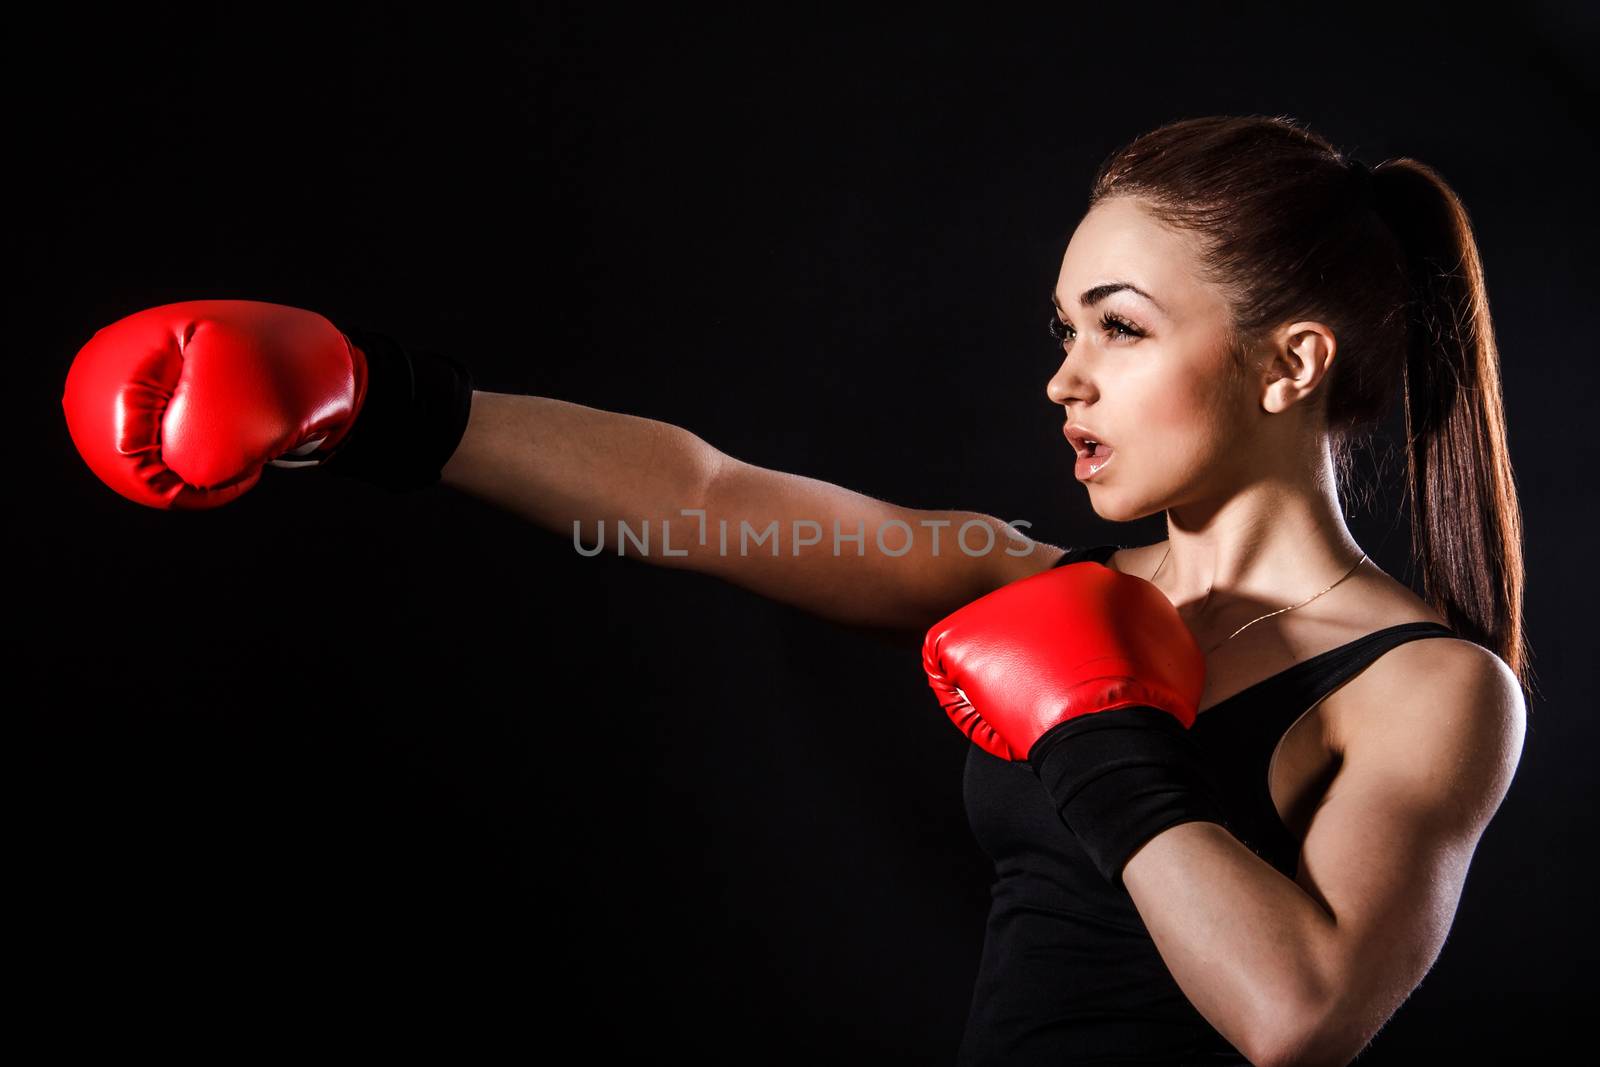 Beautiful young woman in a red boxing gloves over black background